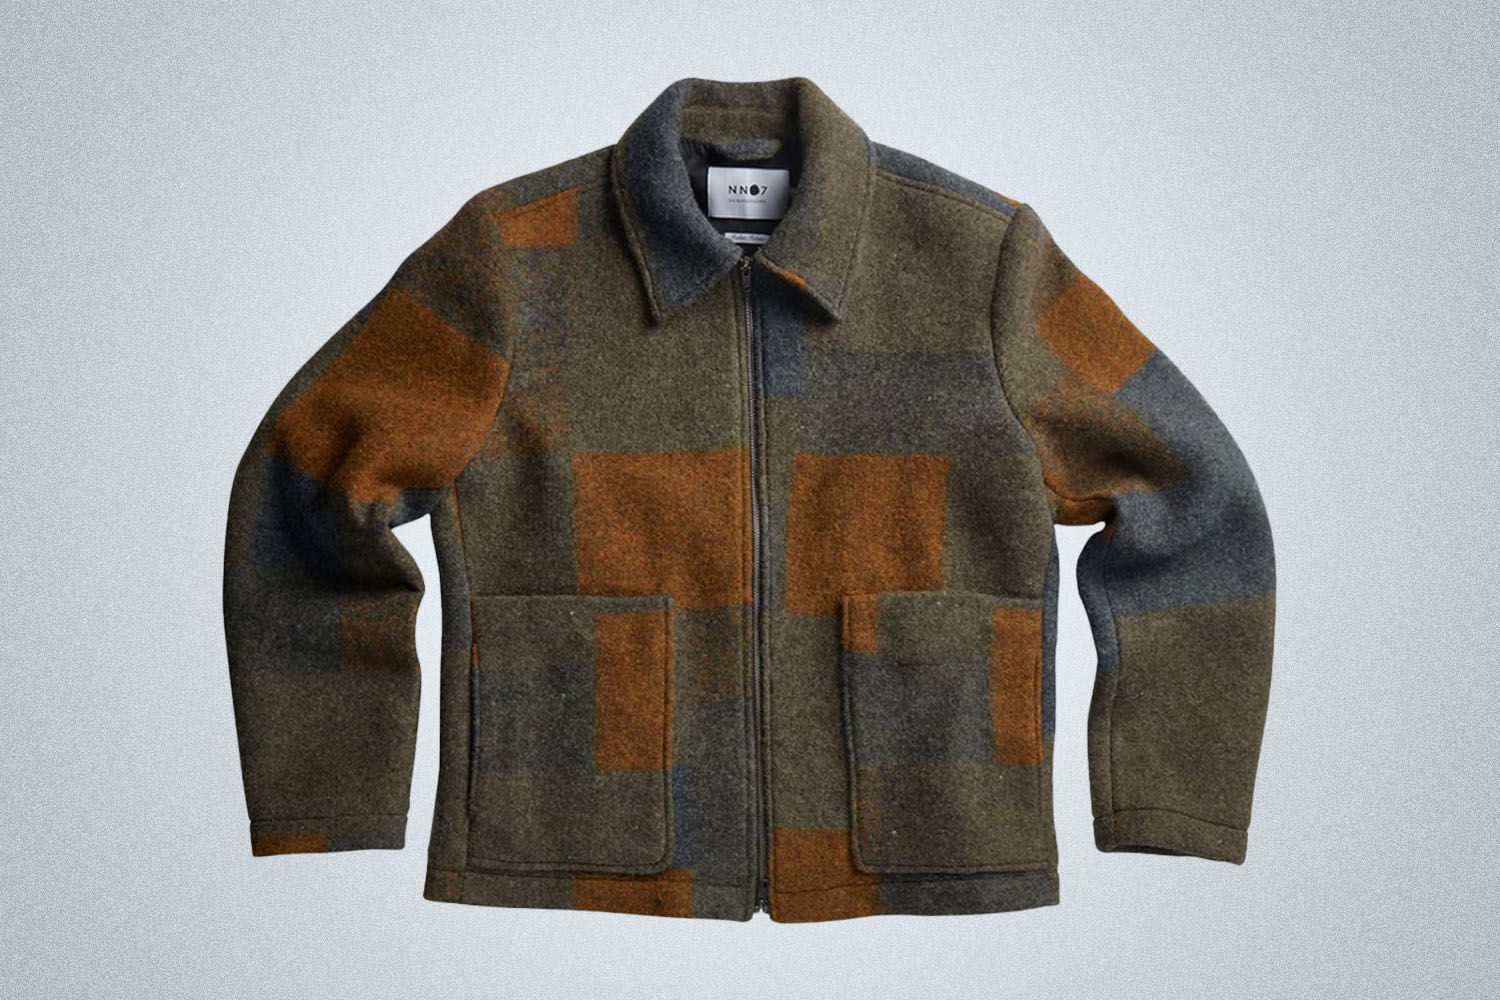 Carmy's Wool Jacket, The Real Star of FX's The Bear - InsideHook